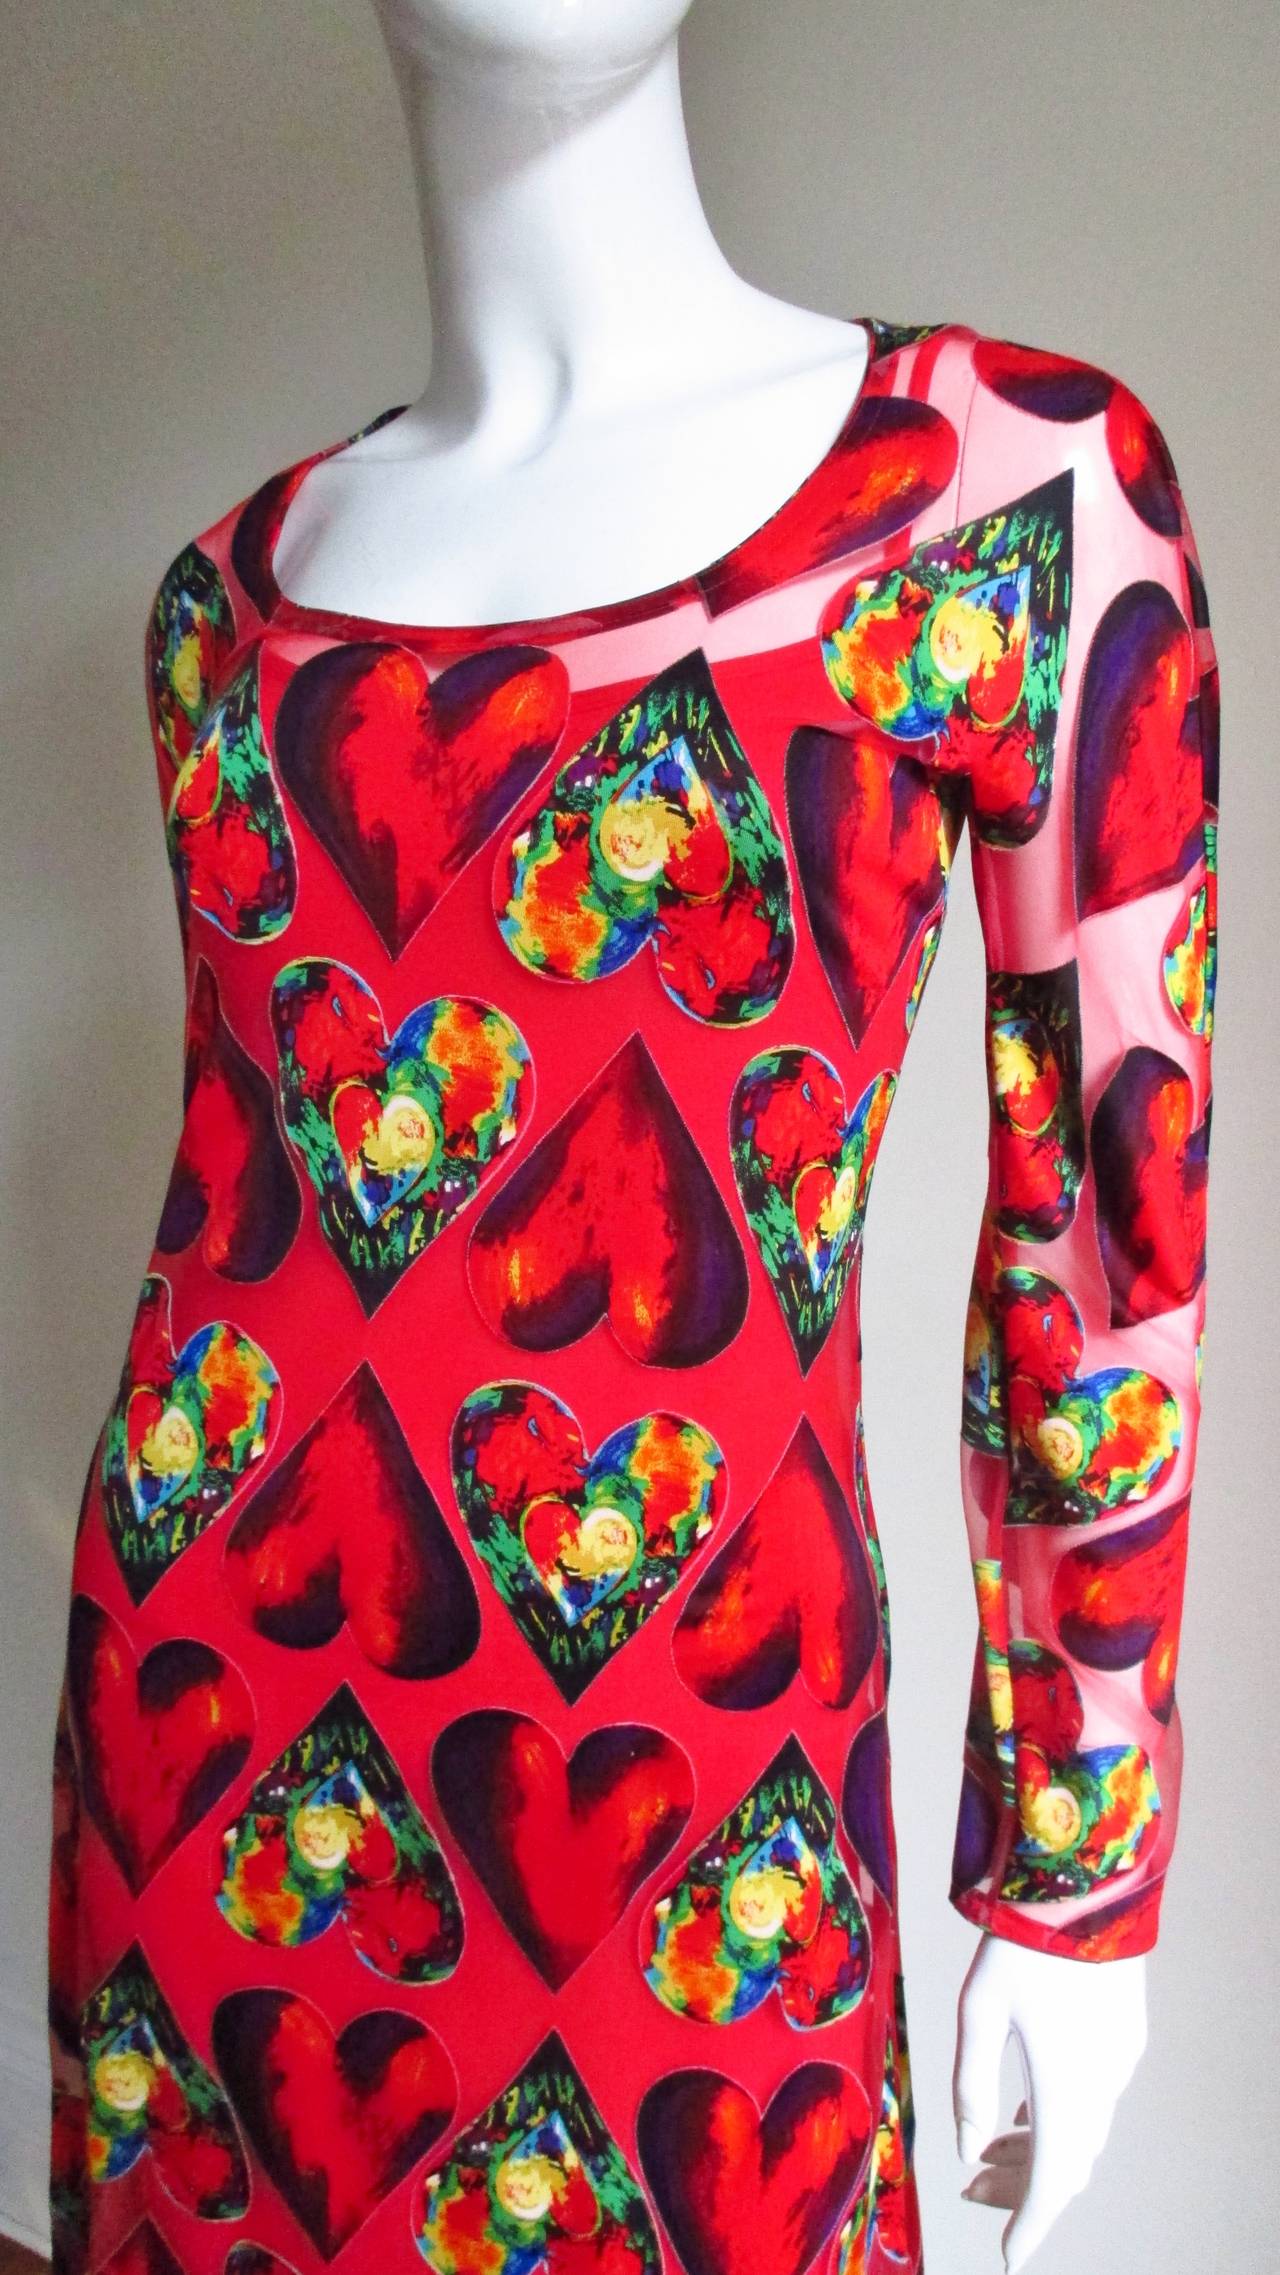 A brightly colored dress from Gianni Versace in a synthetic blend.  There are alternating hearts in red and bold colors on a sheer red background.  The dress is long sleeved with a scoop neckline and a 5